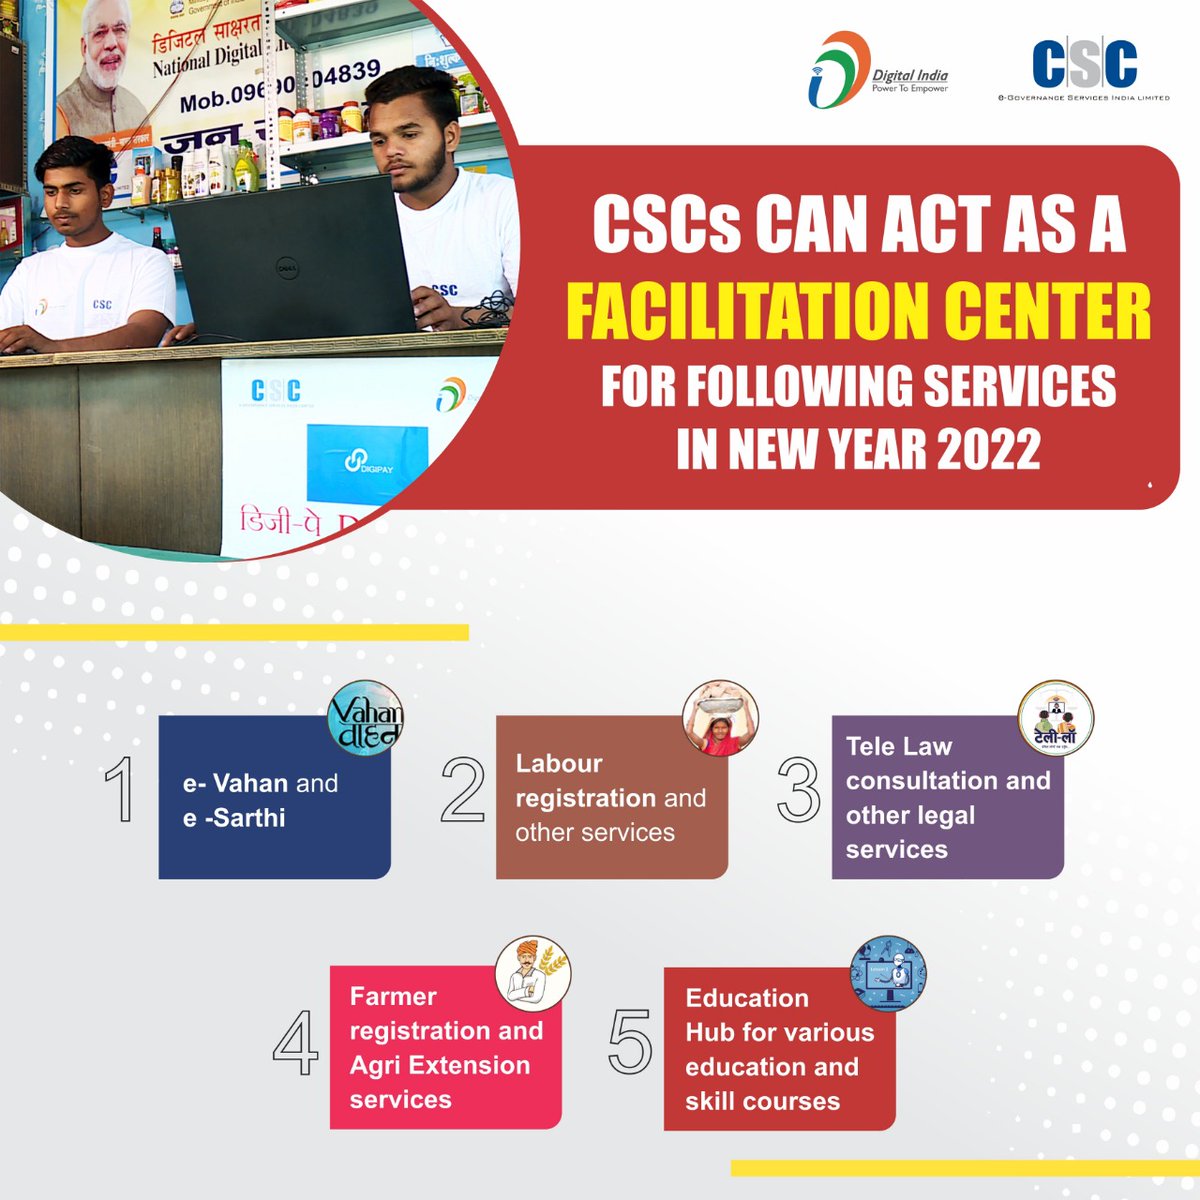 Great News!! CSCs CAN ACT AS A FACILITATION CENTER FOR FOLLOWING SERVICES IN NEW YEAR 2022... #CSC #DigitalIndia #RuralEmpowerment #HappyNewYear #FridayMotivation #FridayFeeling #HappyNewYear2022